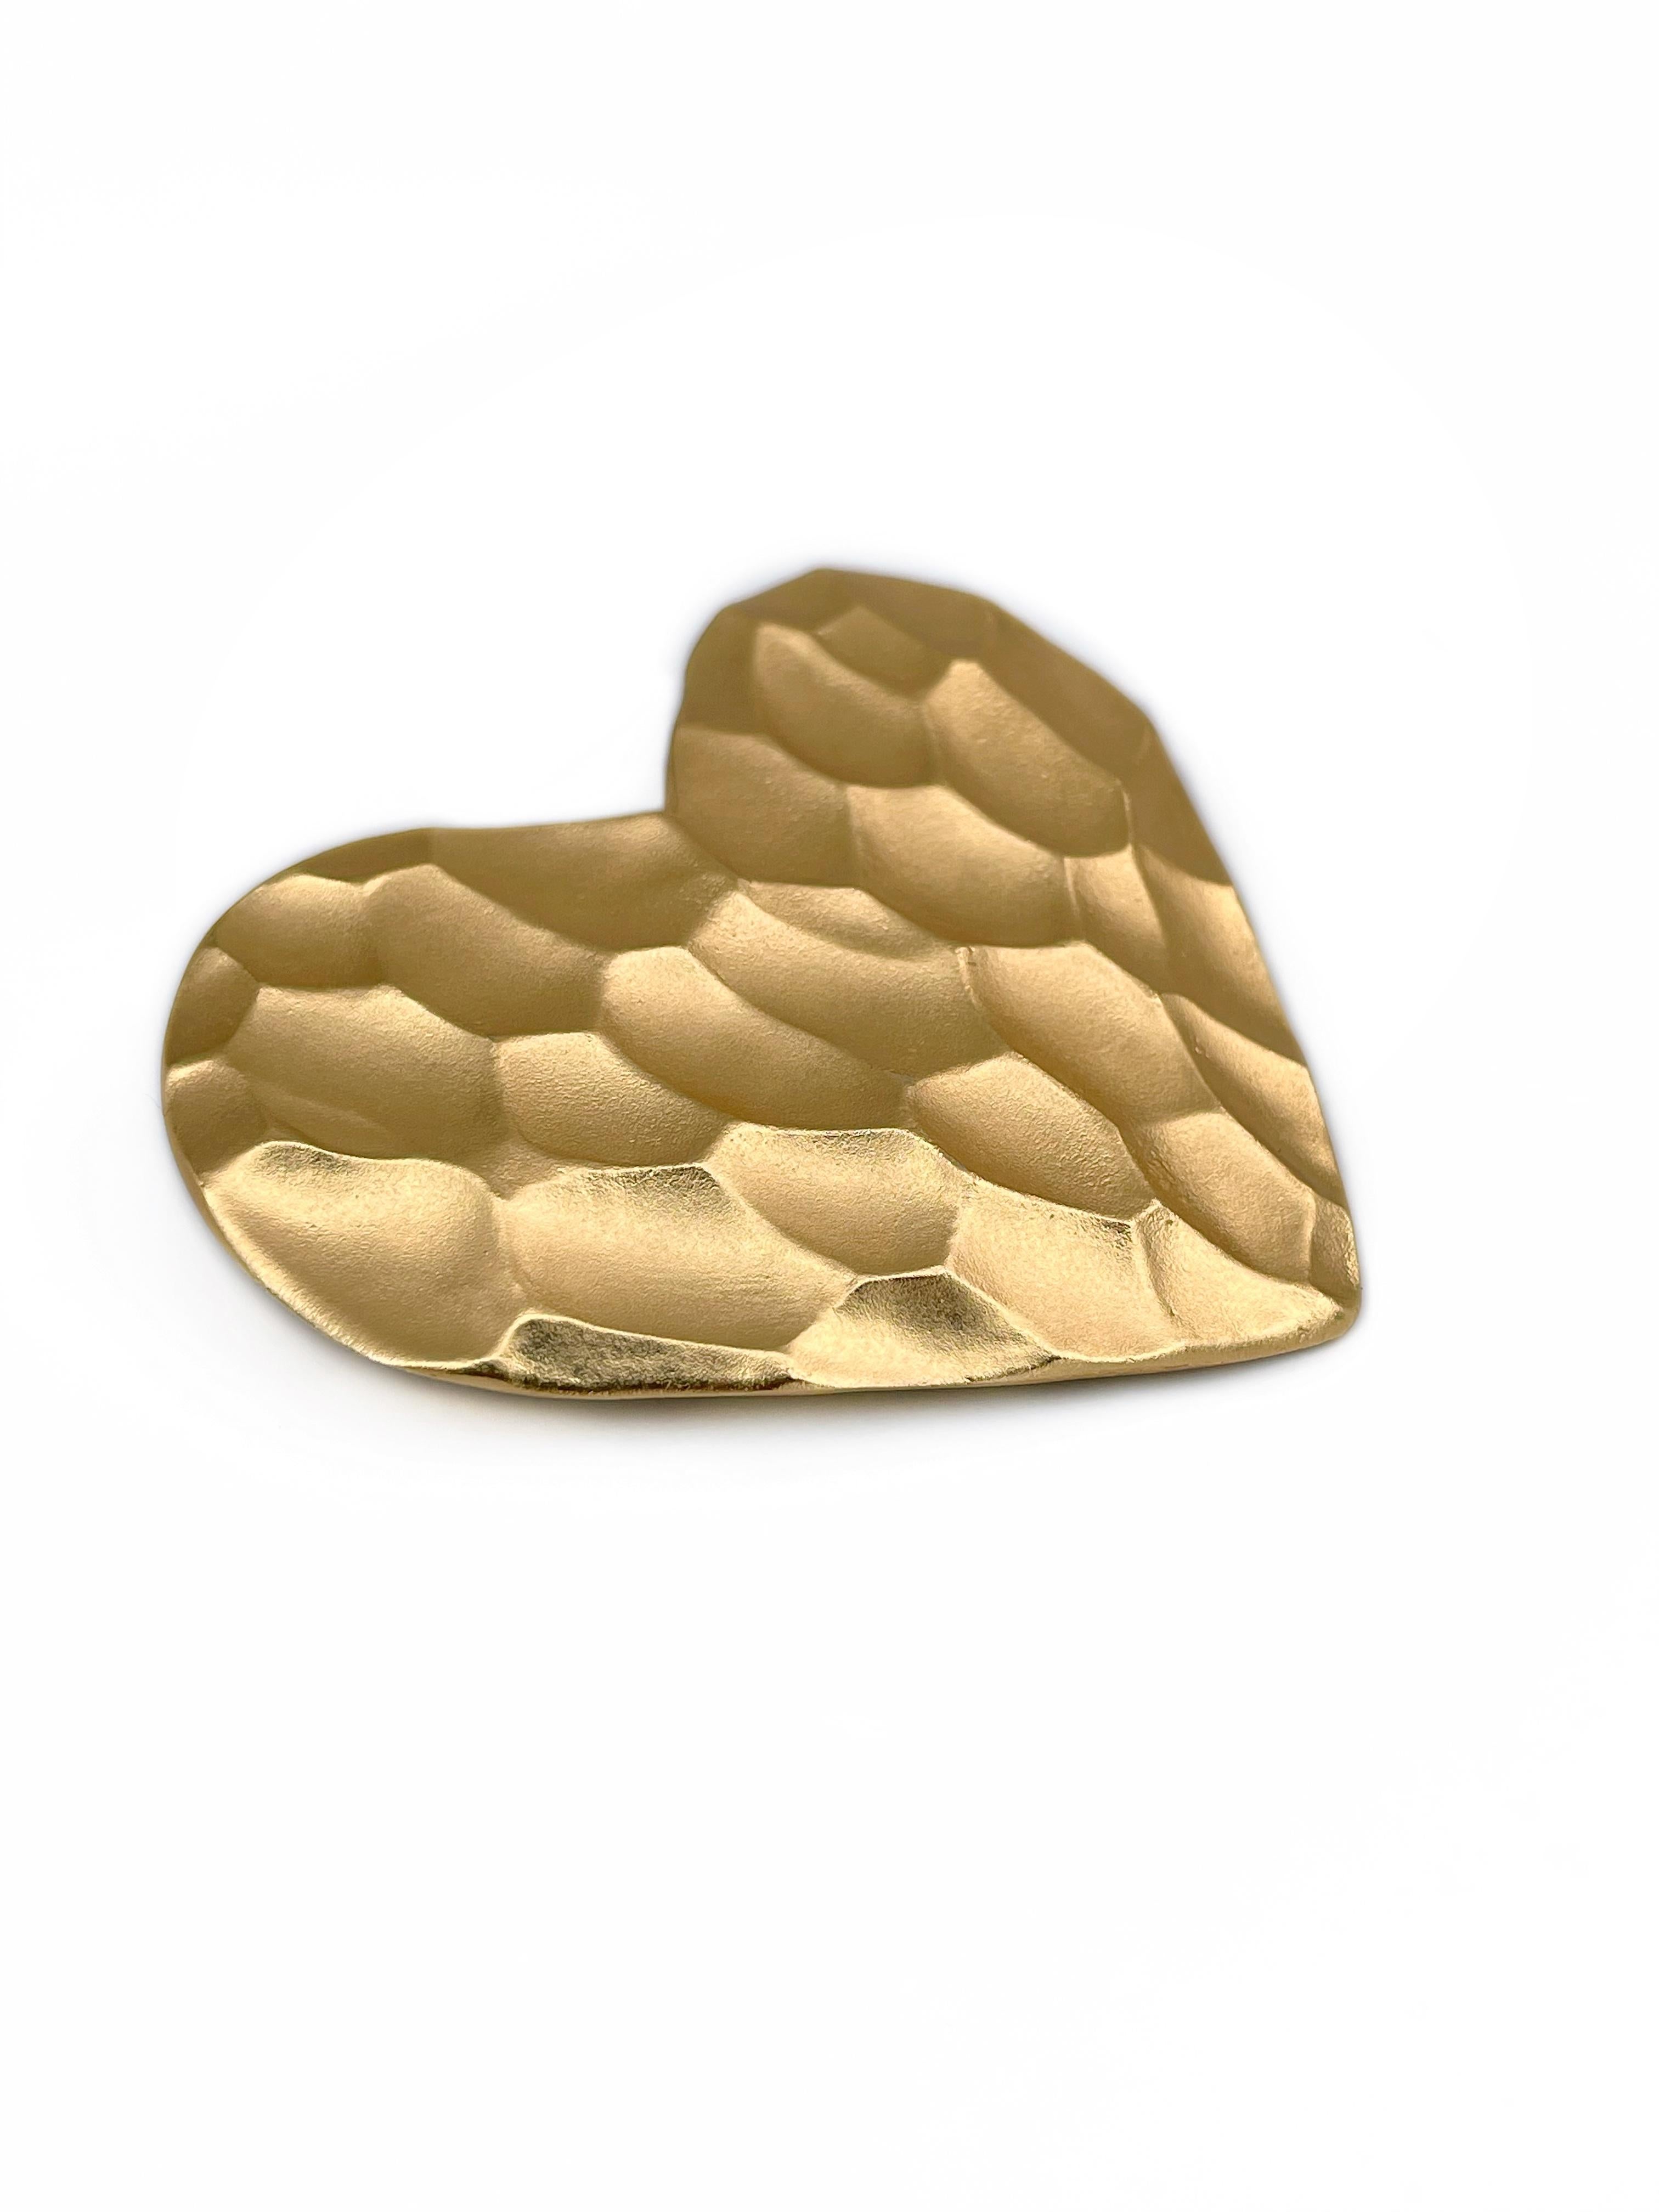 This is a gold tone textured pattern heart brooch designed by YSL in 1980’s. The piece is gold plated. 

Signed: “YSL. Made in France” (shown in photos).

Size: 5.7x5.5cm

———

If you have any questions, please feel free to ask. We describe our